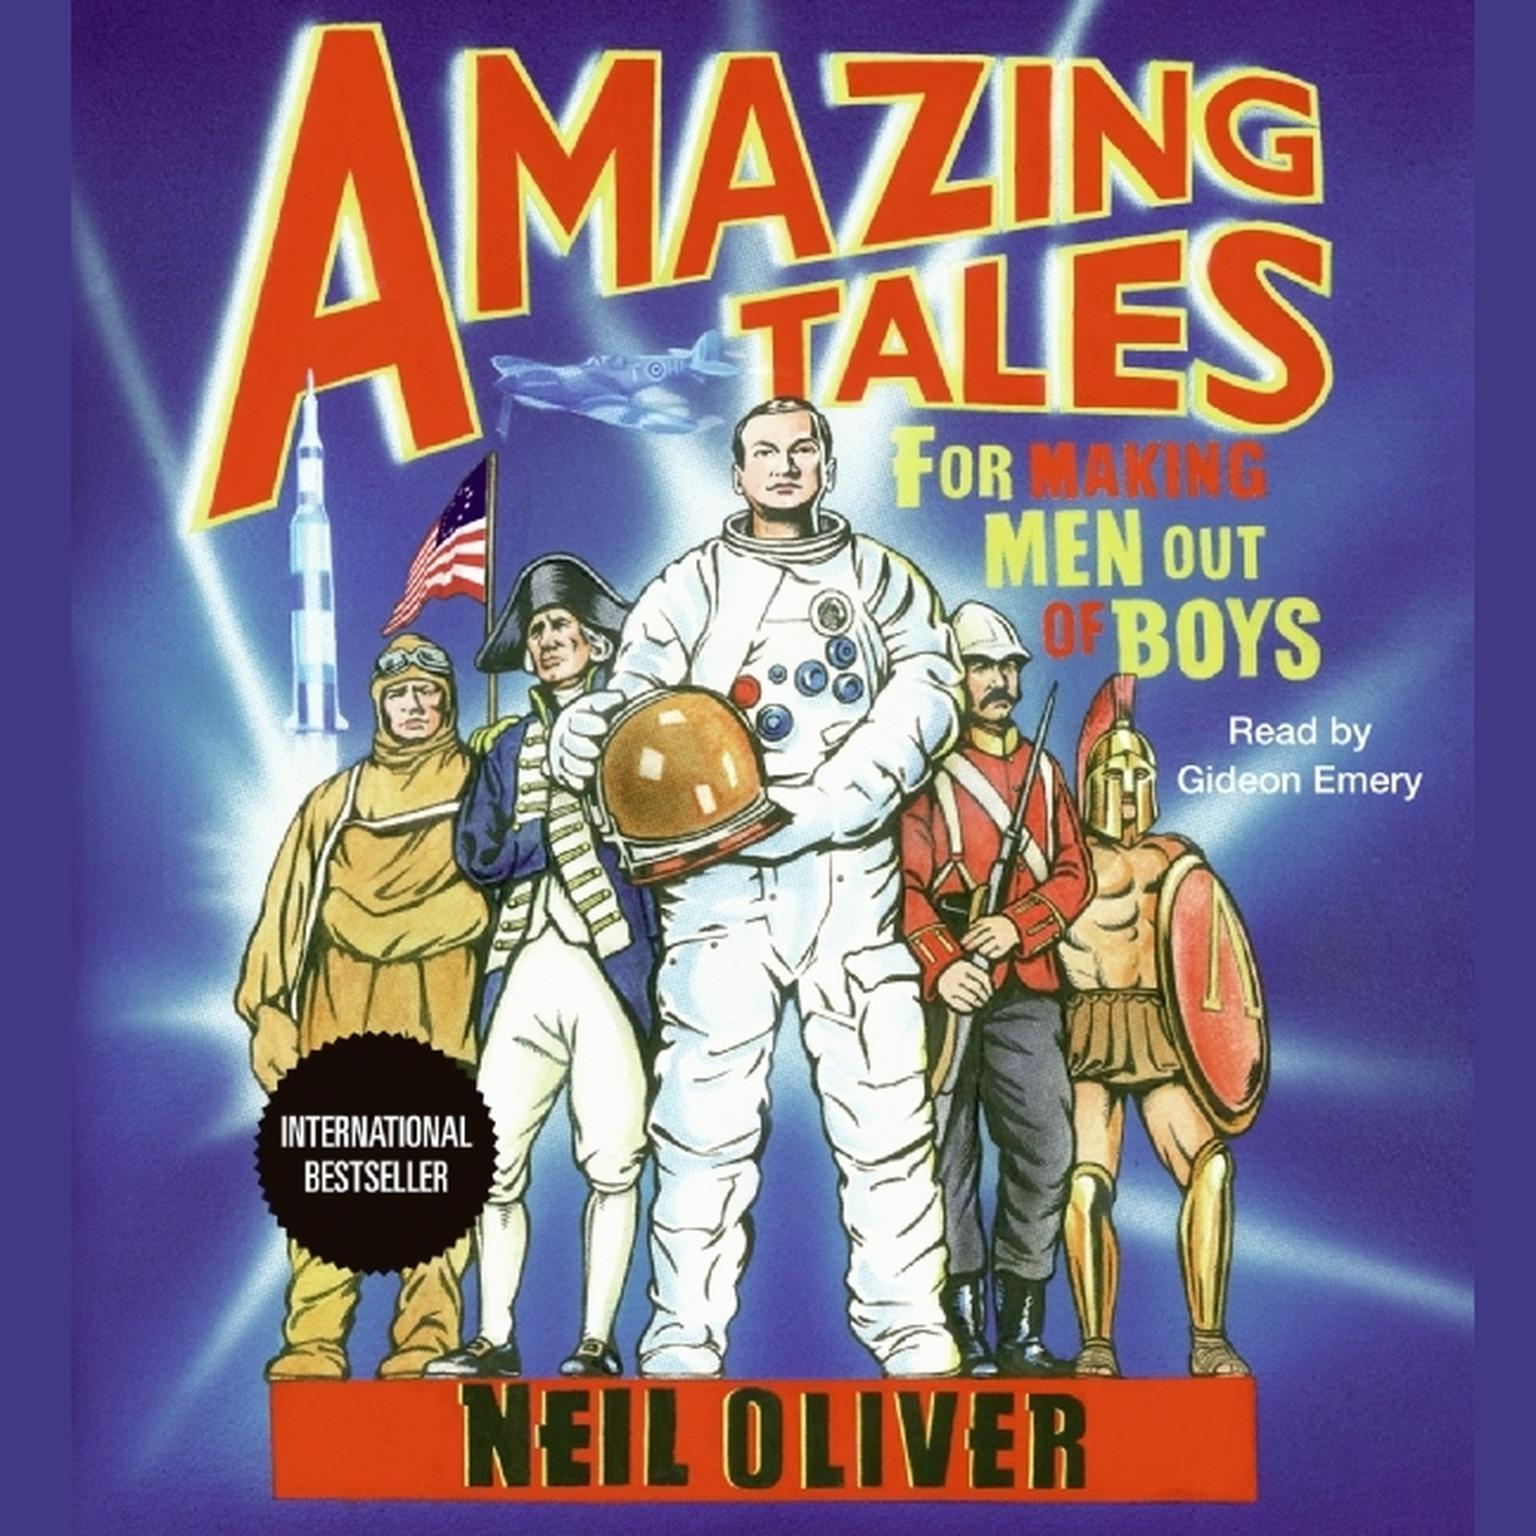 Amazing Tales for Making Men Out of Boys (Abridged) Audiobook, by Neil Oliver